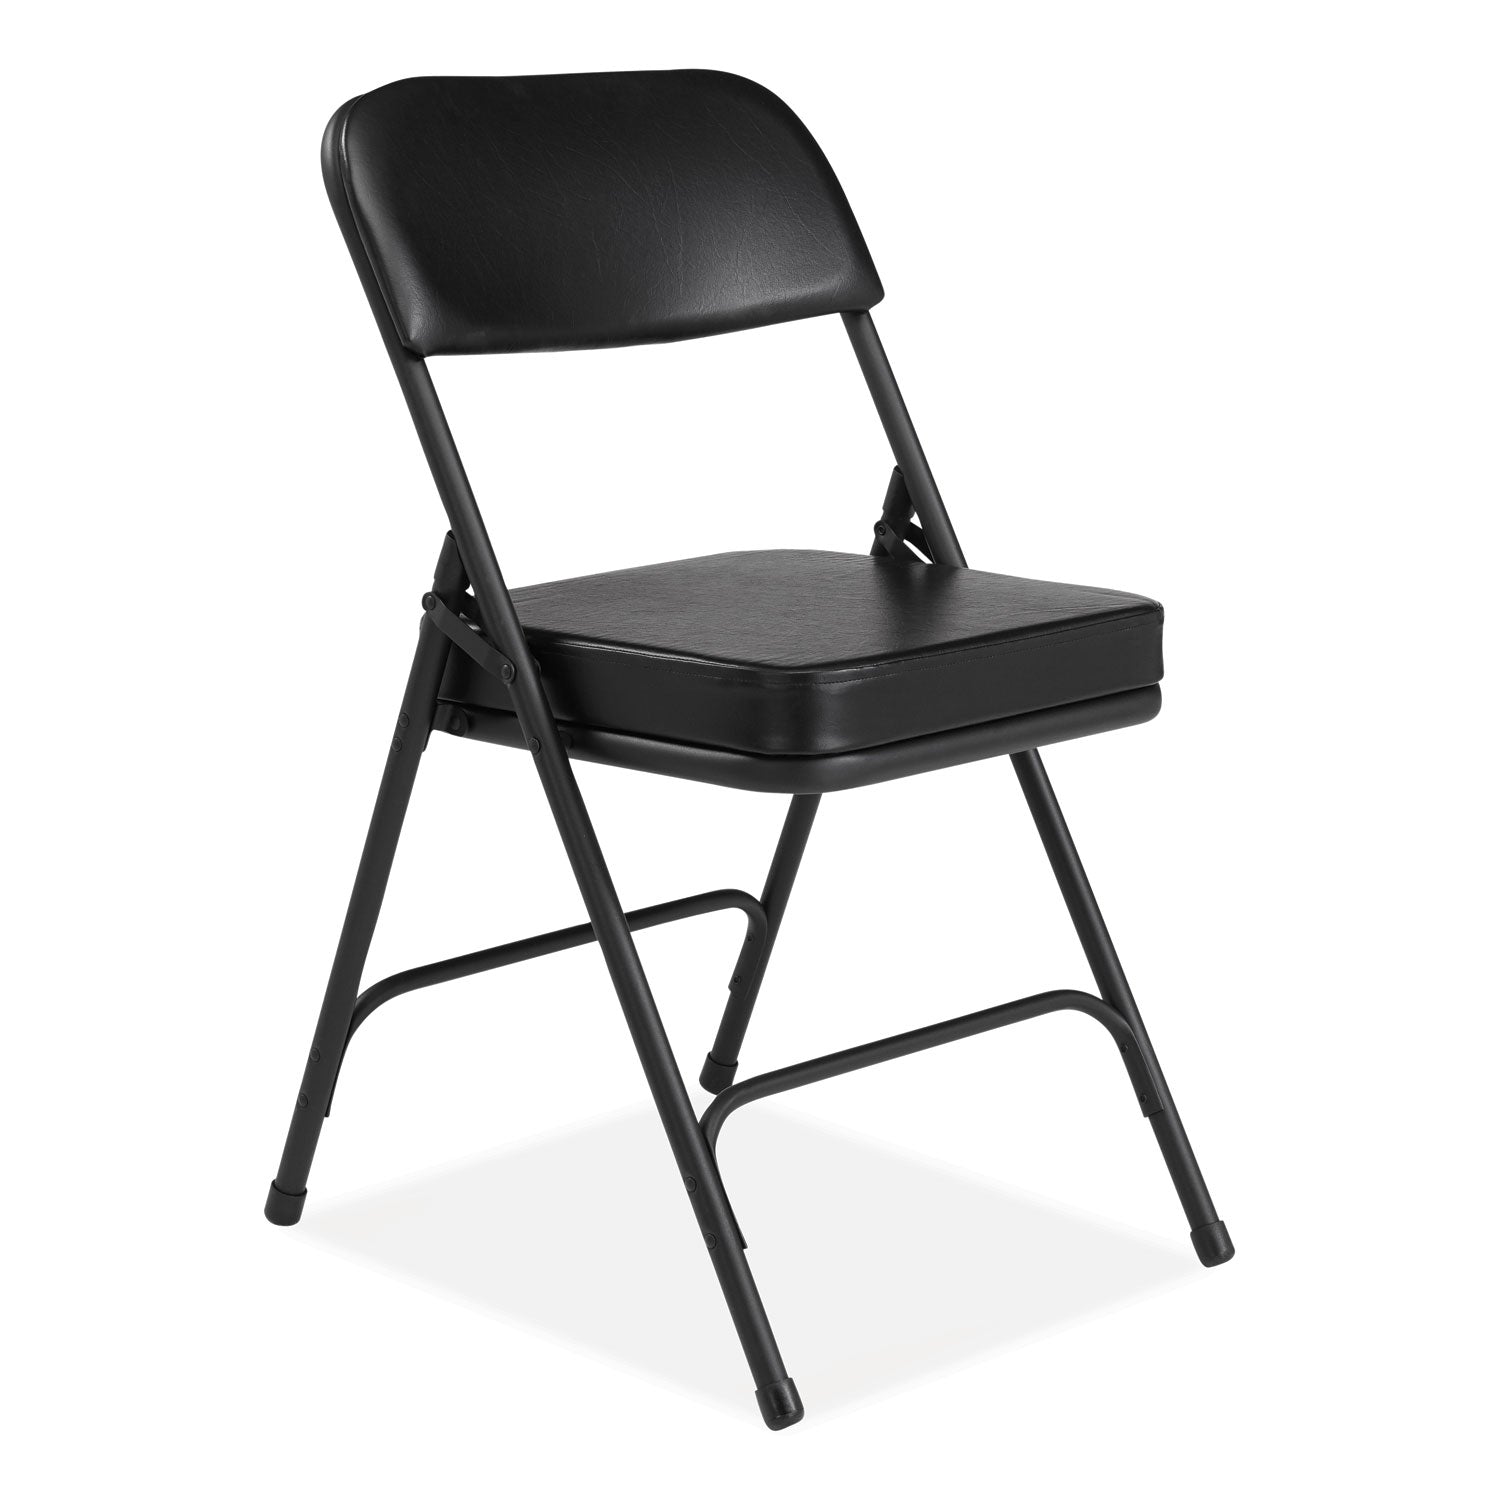 3200-series-2-vinyl-upholstered-double-hinge-folding-chair-supports-300lb-185-seat-ht-black-2-ctships-in-1-3-bus-days_nps3210 - 2